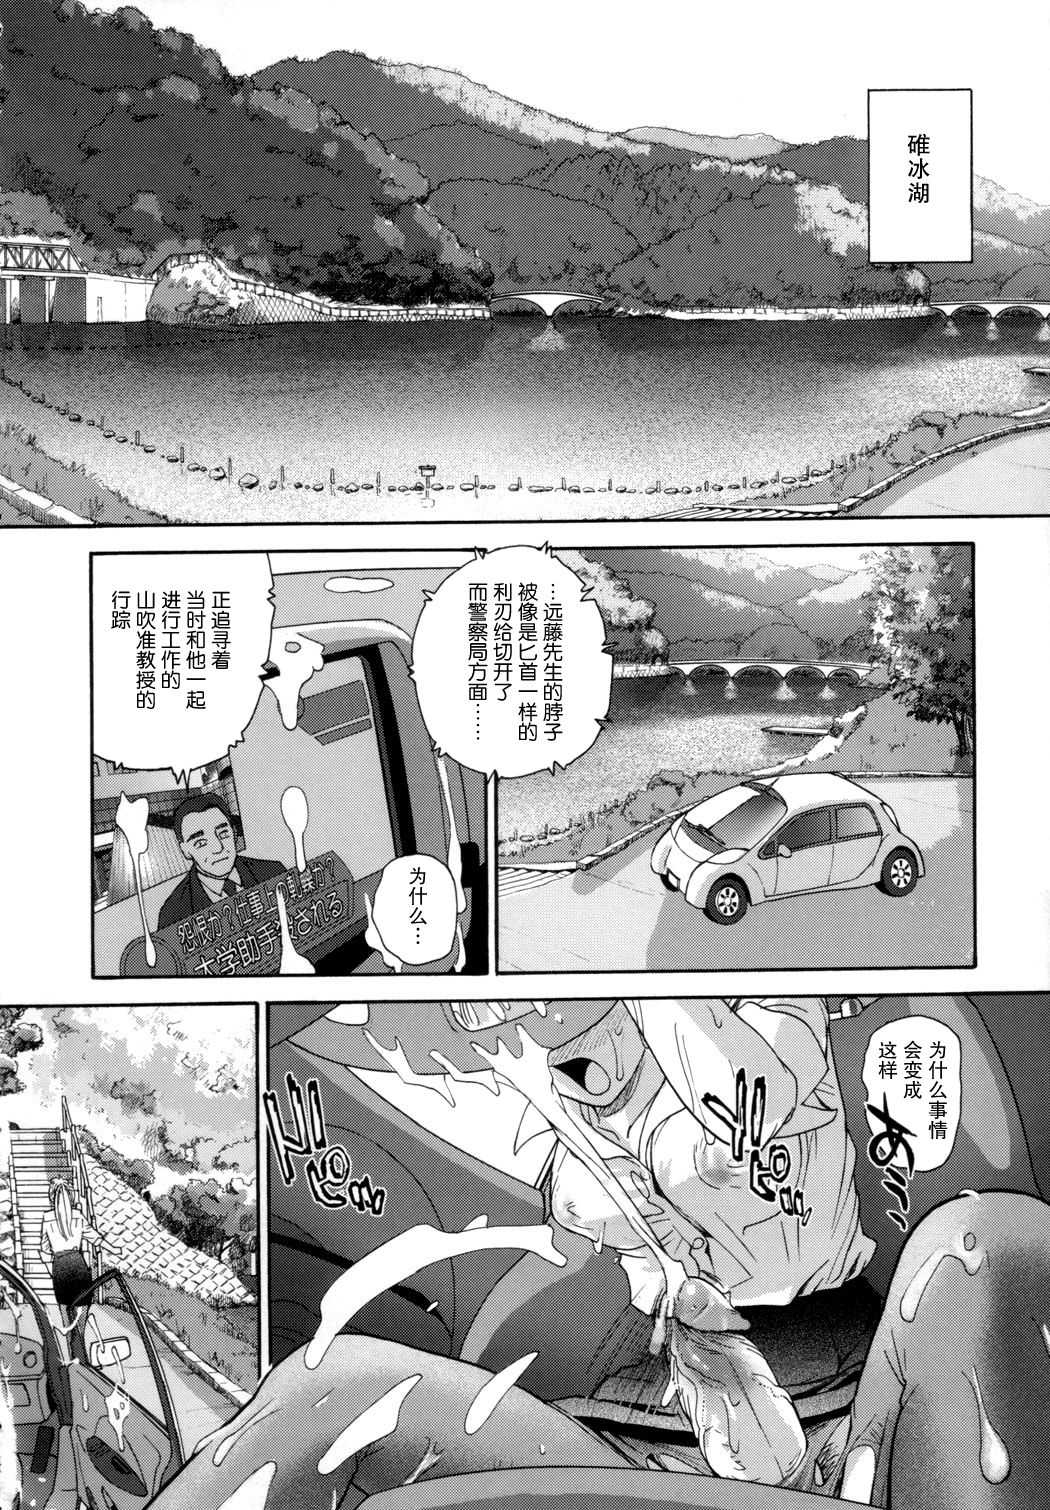 (C72) [Behind Moon (Q)] Dulce Report 9 | 达西报告 9 [Chinese] [哈尼喵汉化组] [Decensored] page 34 full